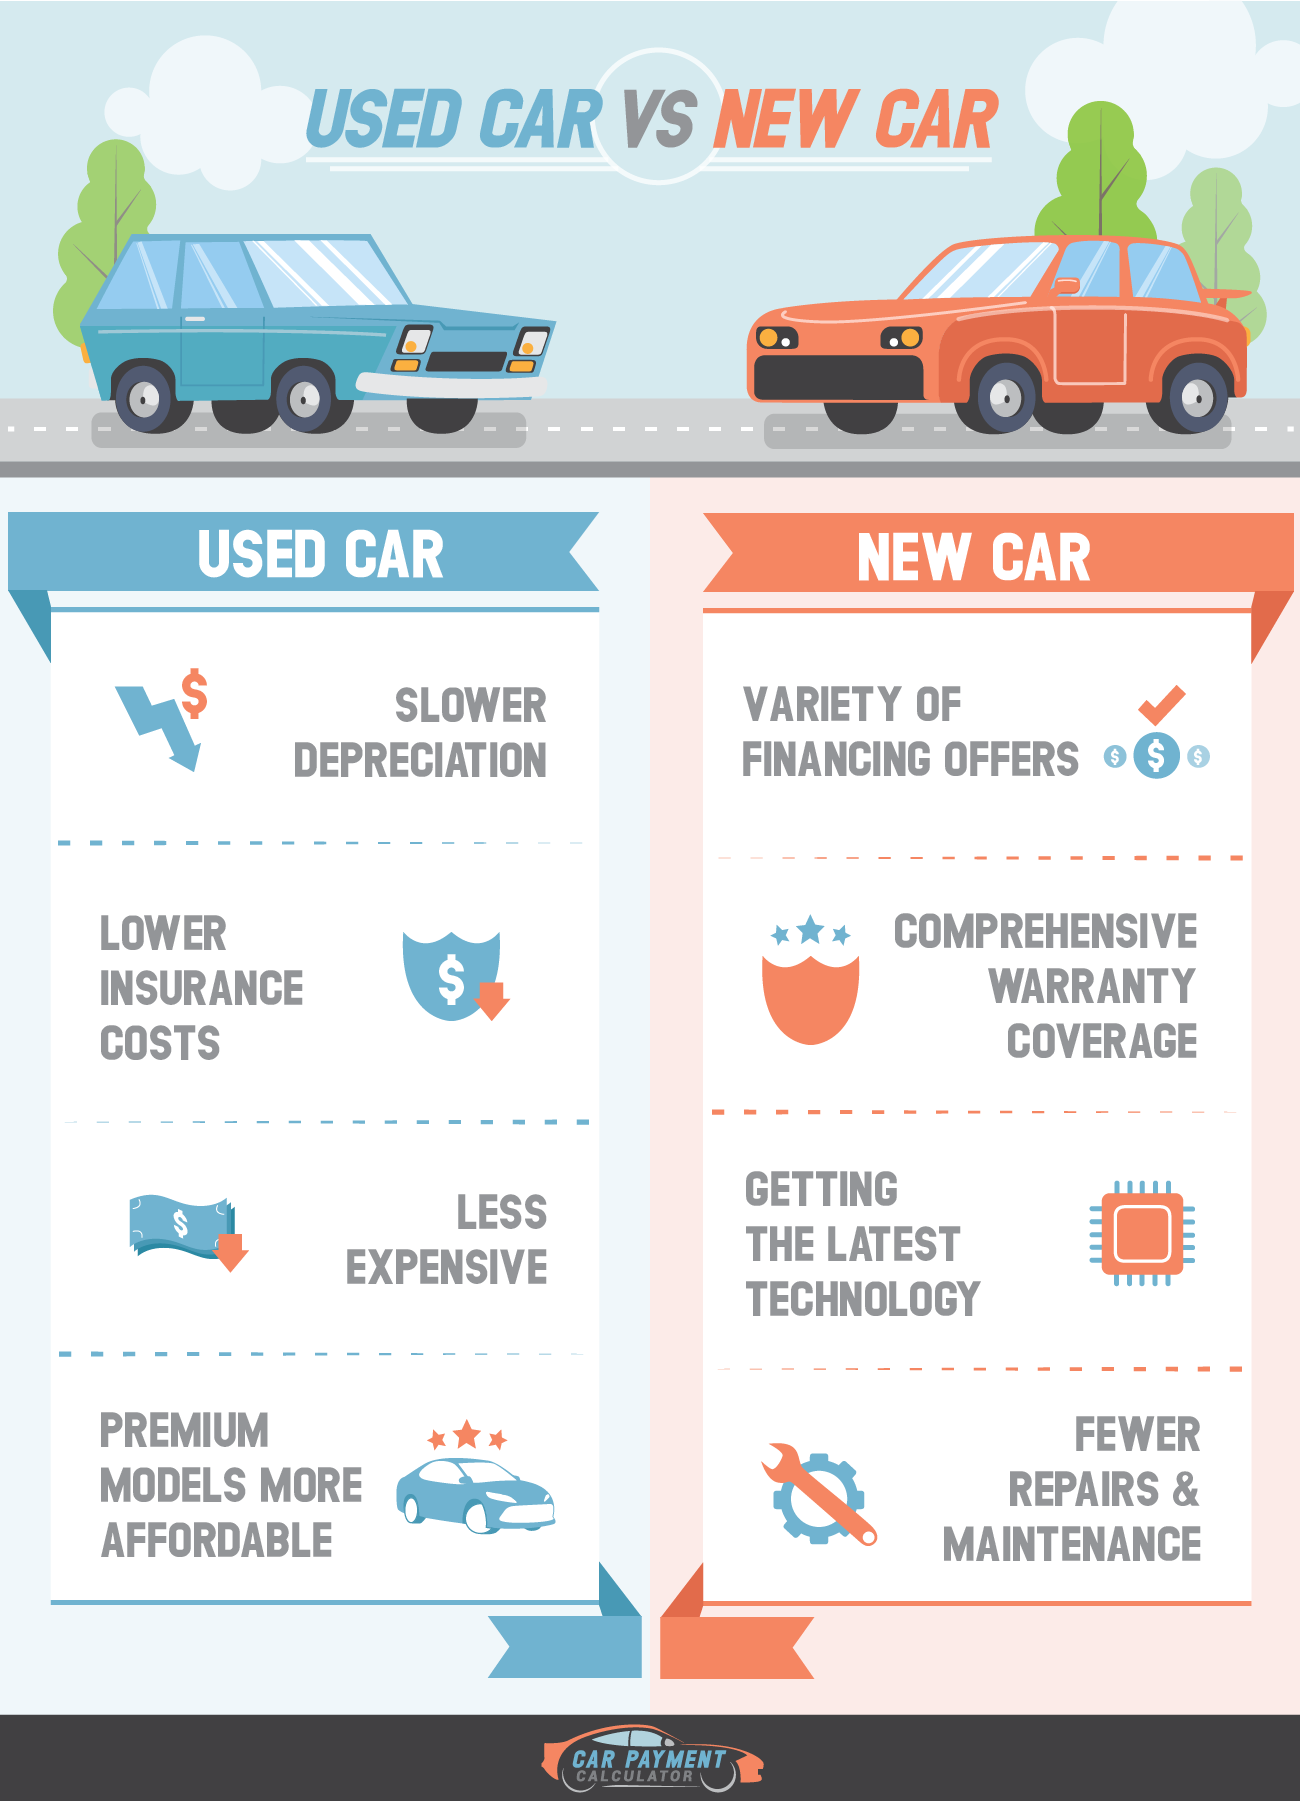 Buying a new car versus buying a used car.